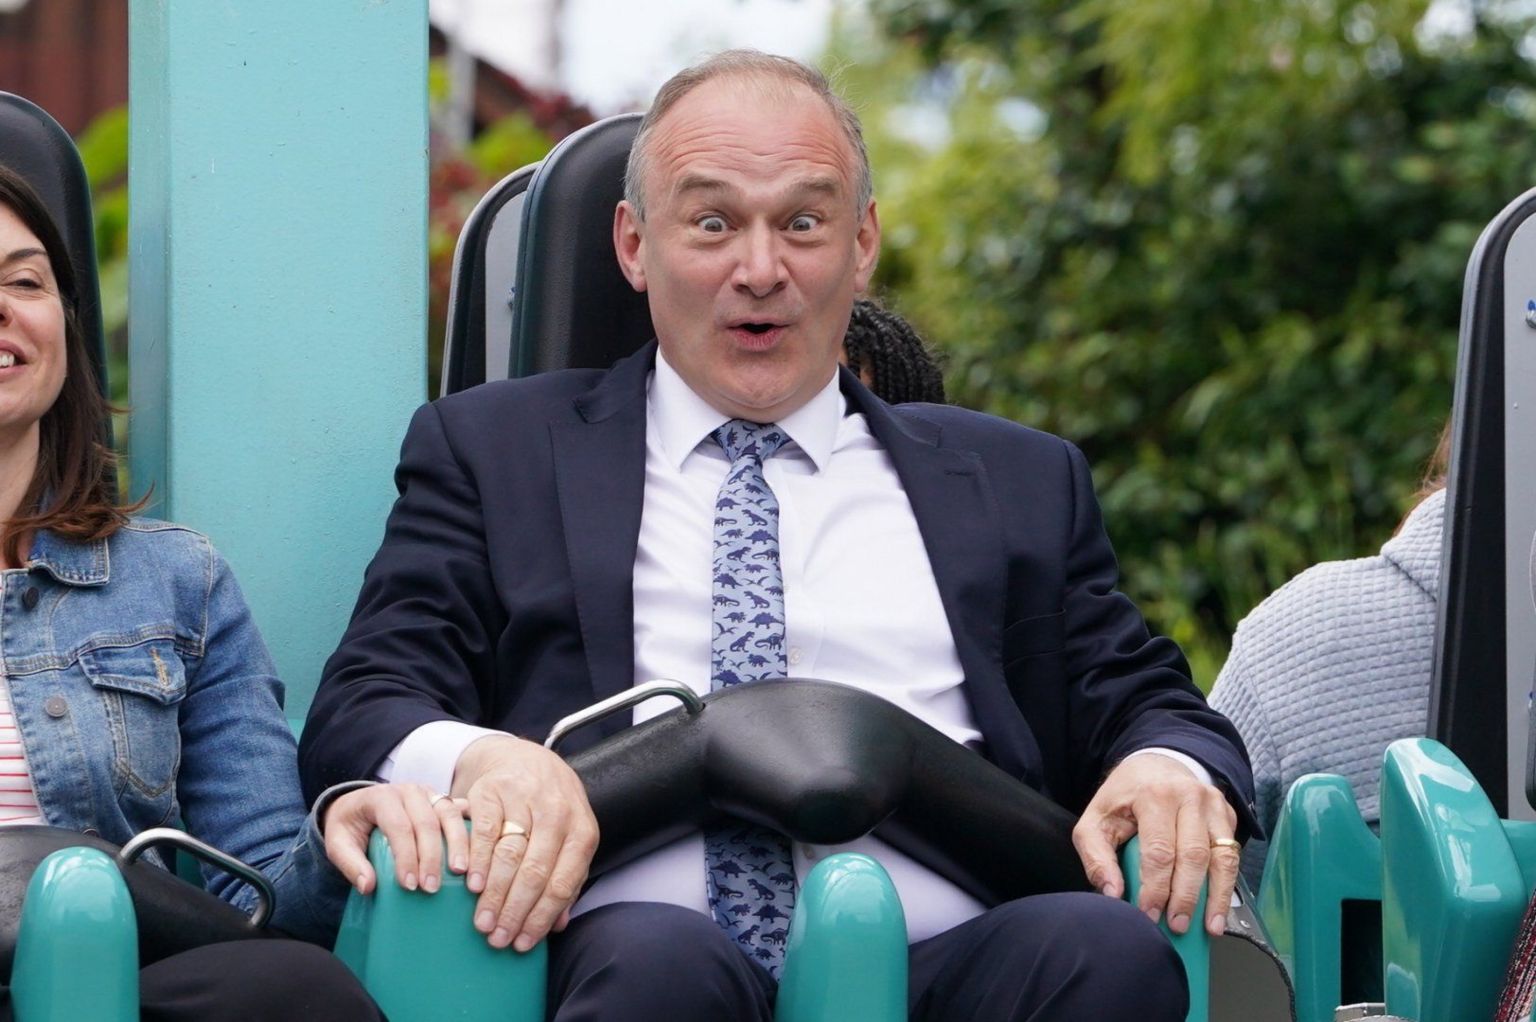 Liberal Democrats leader Sir Ed Davey during a visit to Thorpe Park in Chertsey, Surrey, whilst on the General Election campaign trail